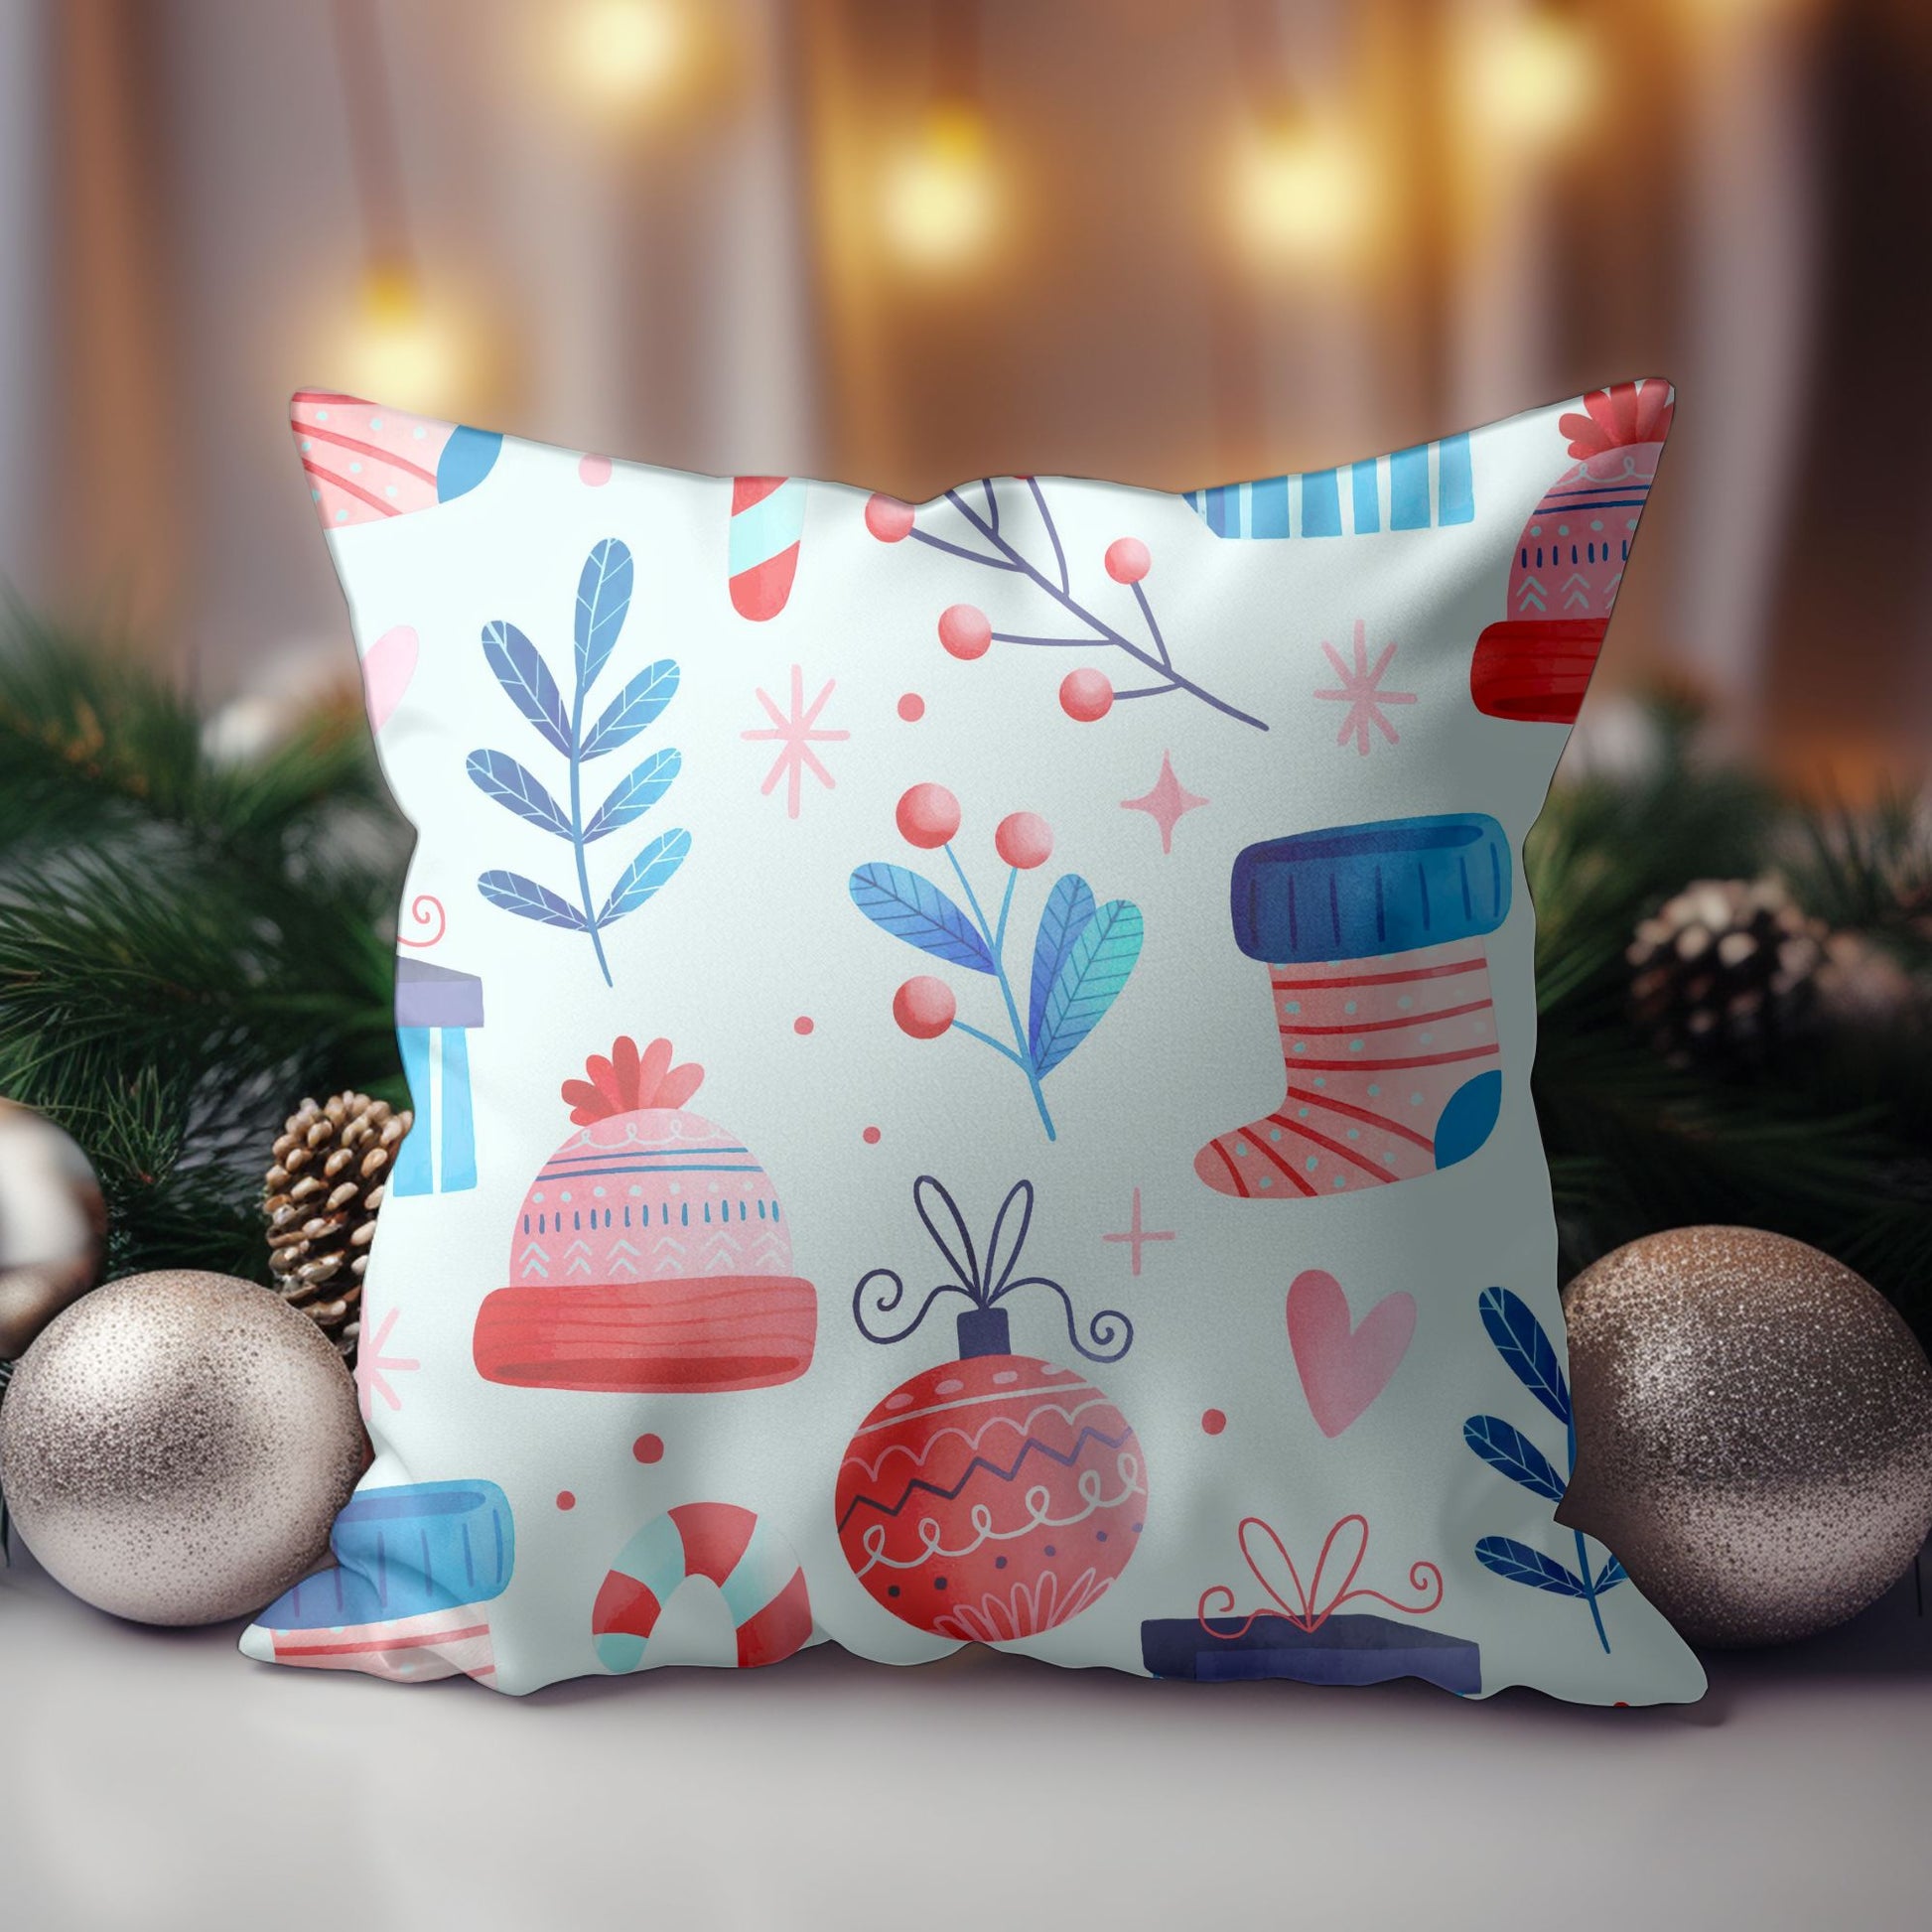 Festive Holiday Pillow with Winter-Themed Design